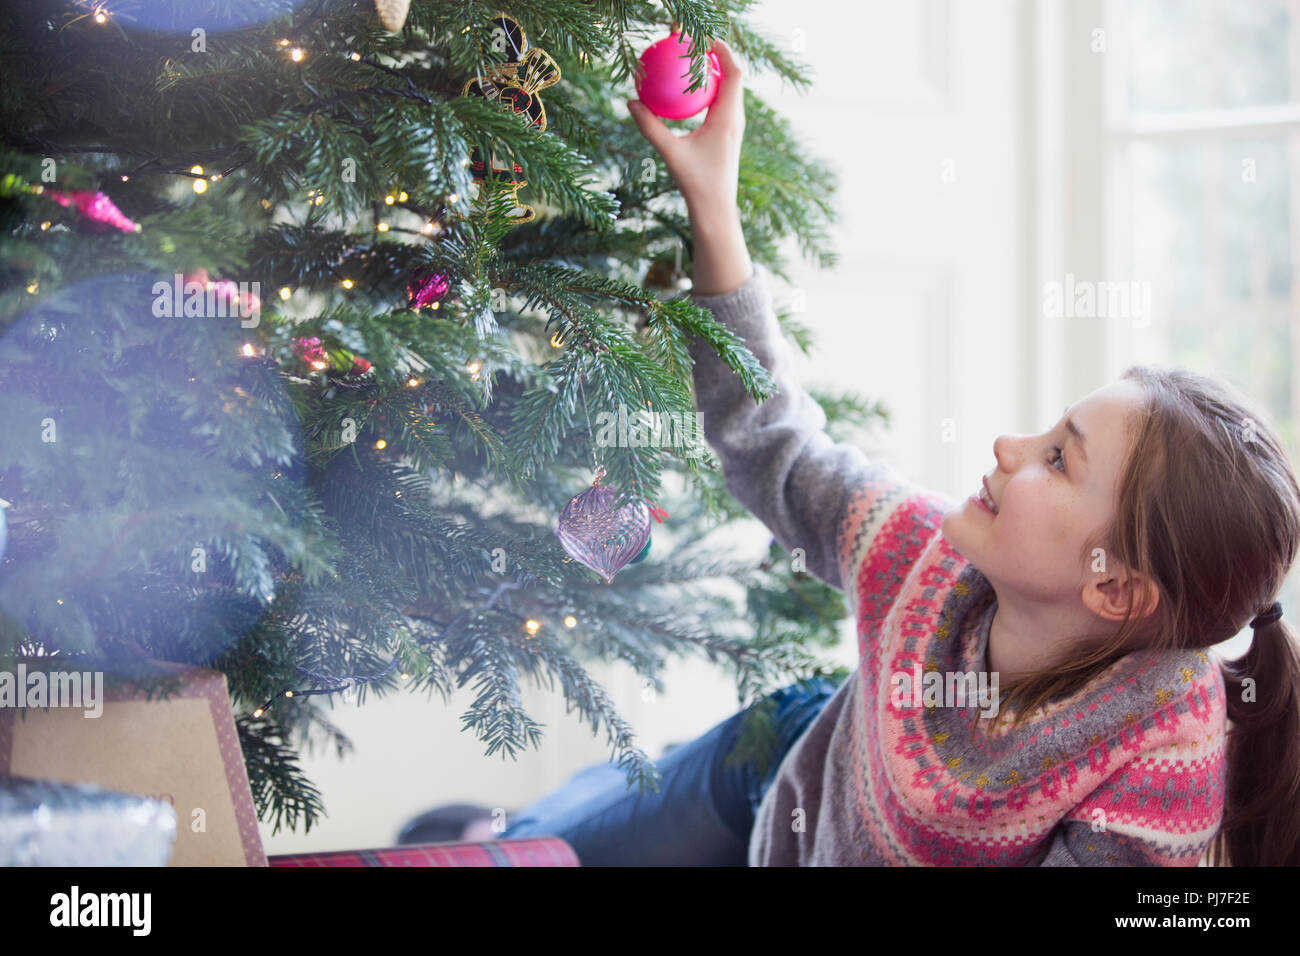 Curious girl touching ornament on Christmas tree Stock Photo